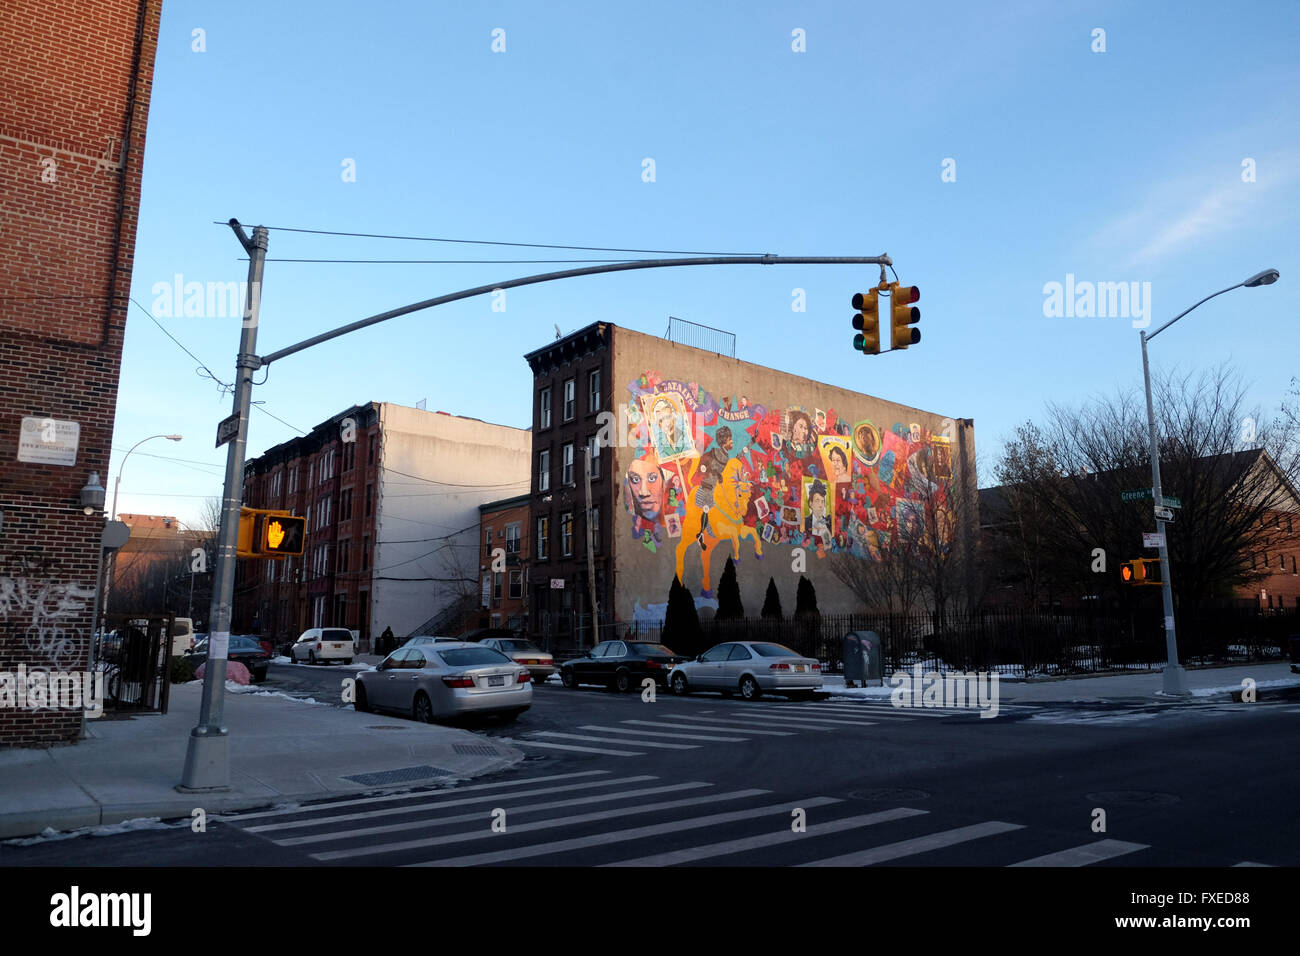 Sun shining on graffiti at dusk in Brooklyn in New York City, United States of America. Stock Photo